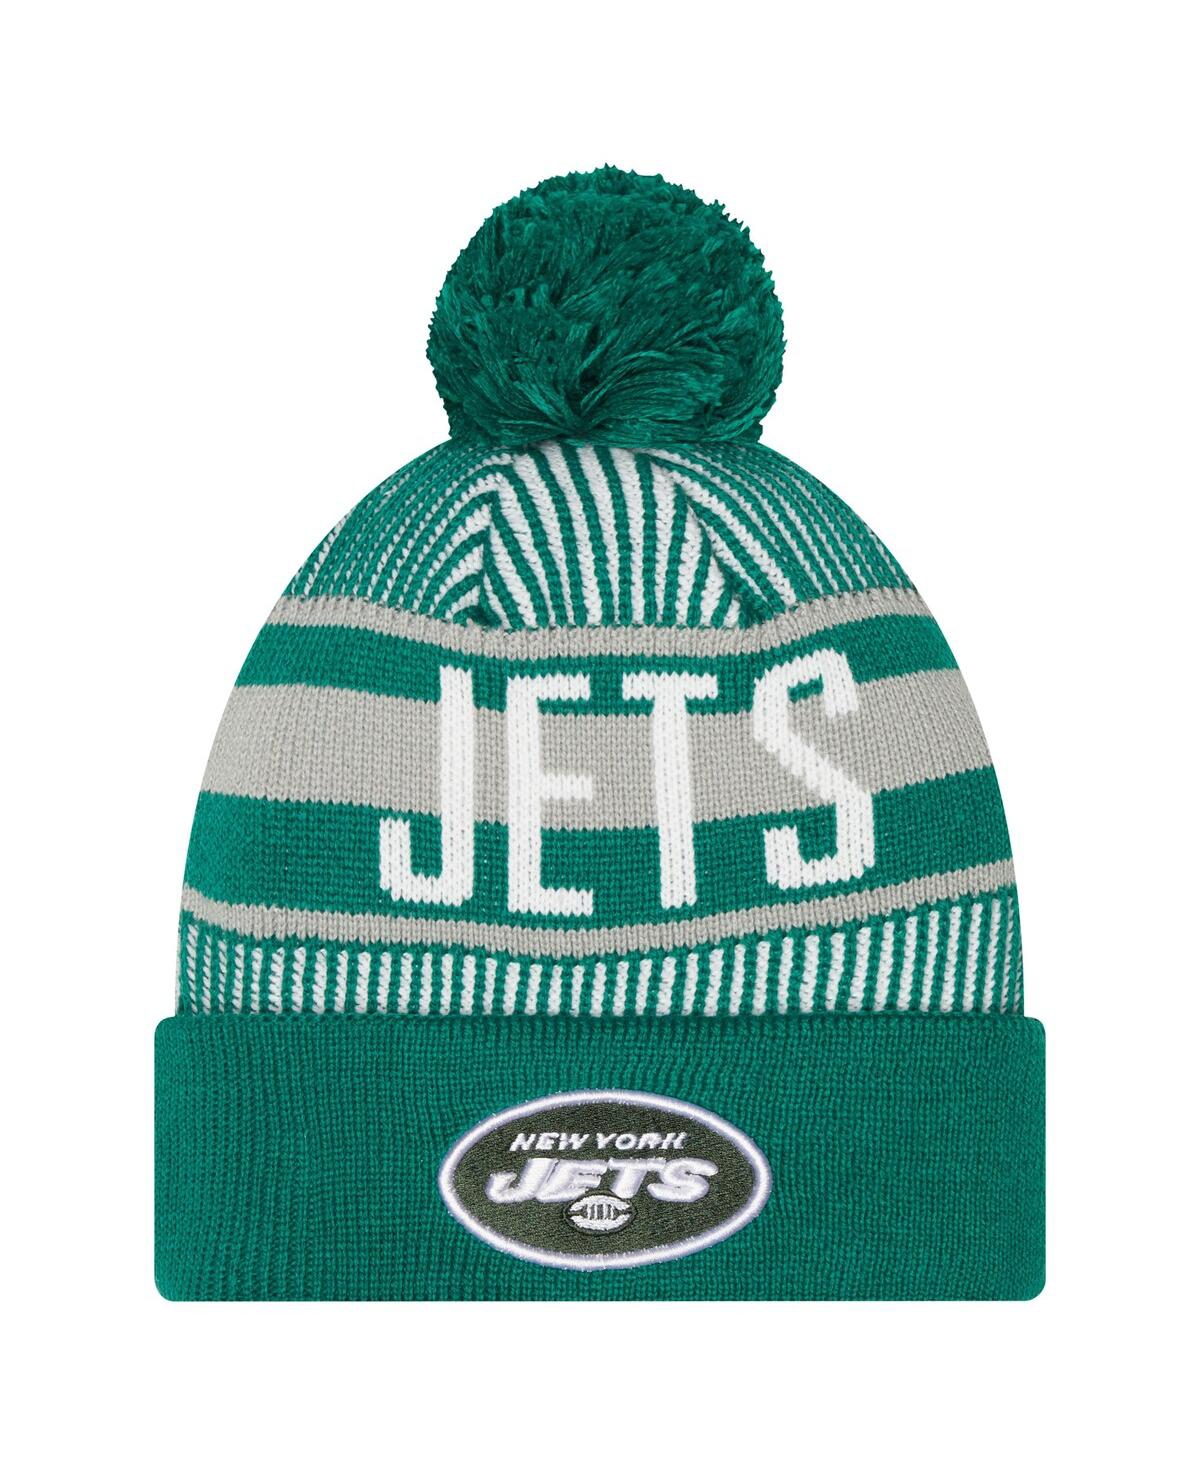 New Era Kids' Youth Boys And Girls  Green New York Jets Striped Cuffed Knit Hat With Pom